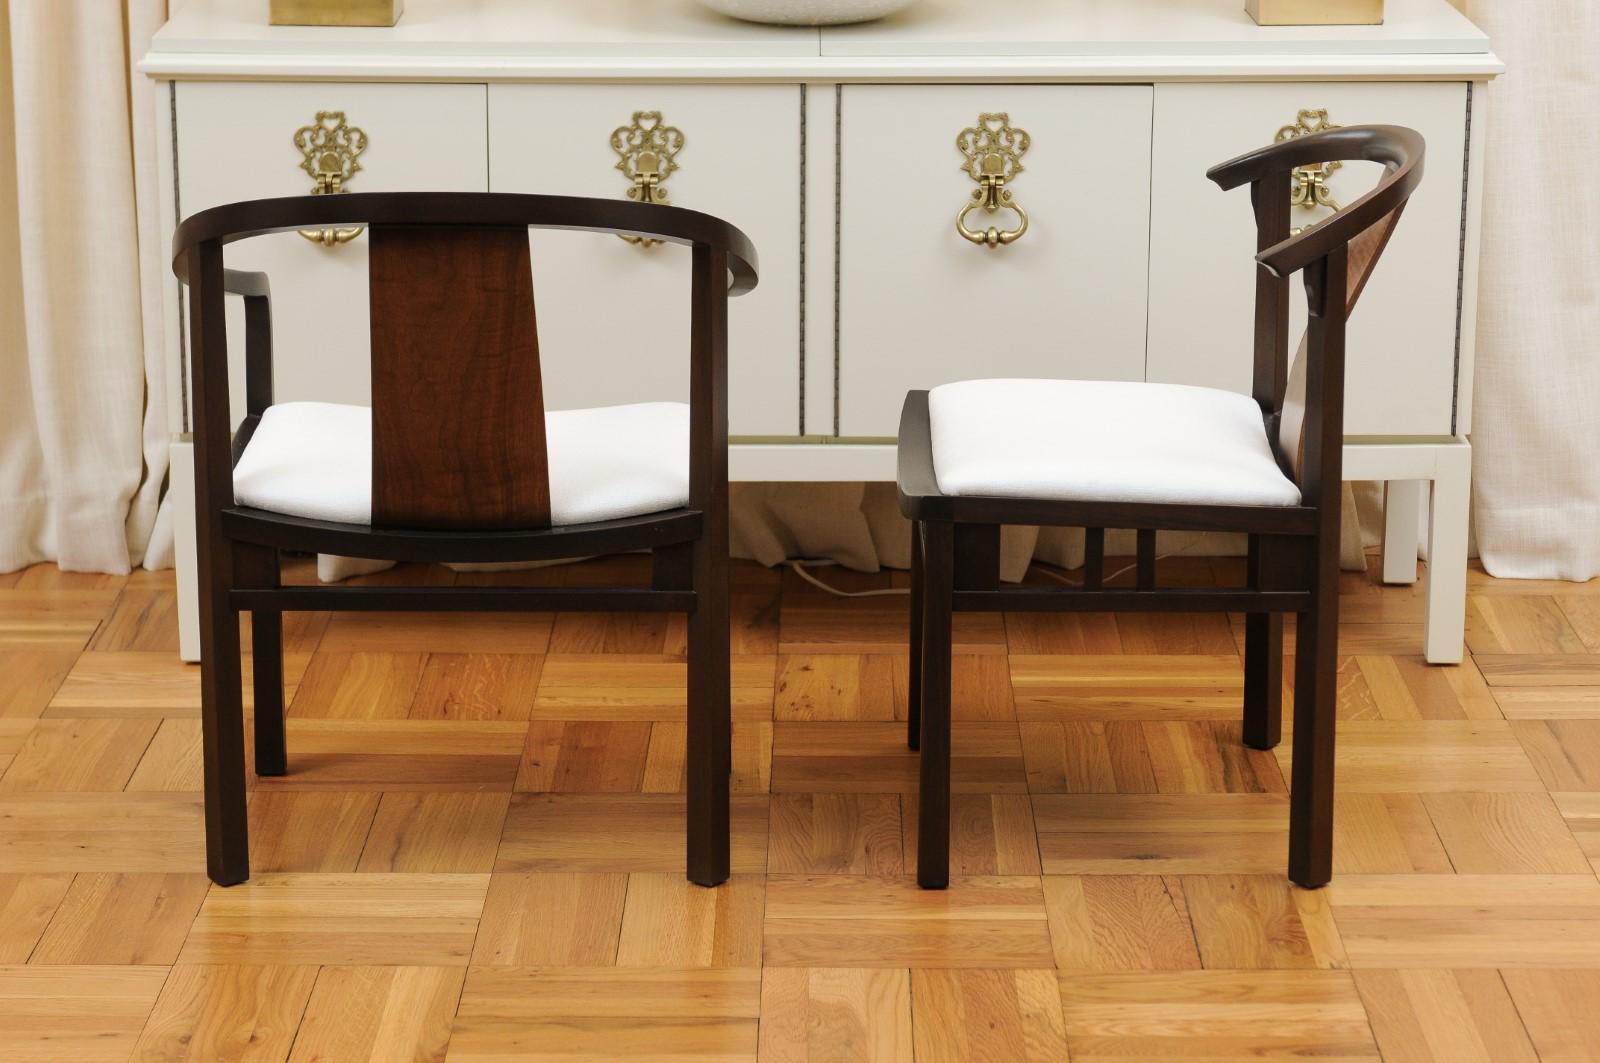 Incredible Set of 14 Rare Walnut Dining Chairs by Michael Taylor, circa 1955 For Sale 2